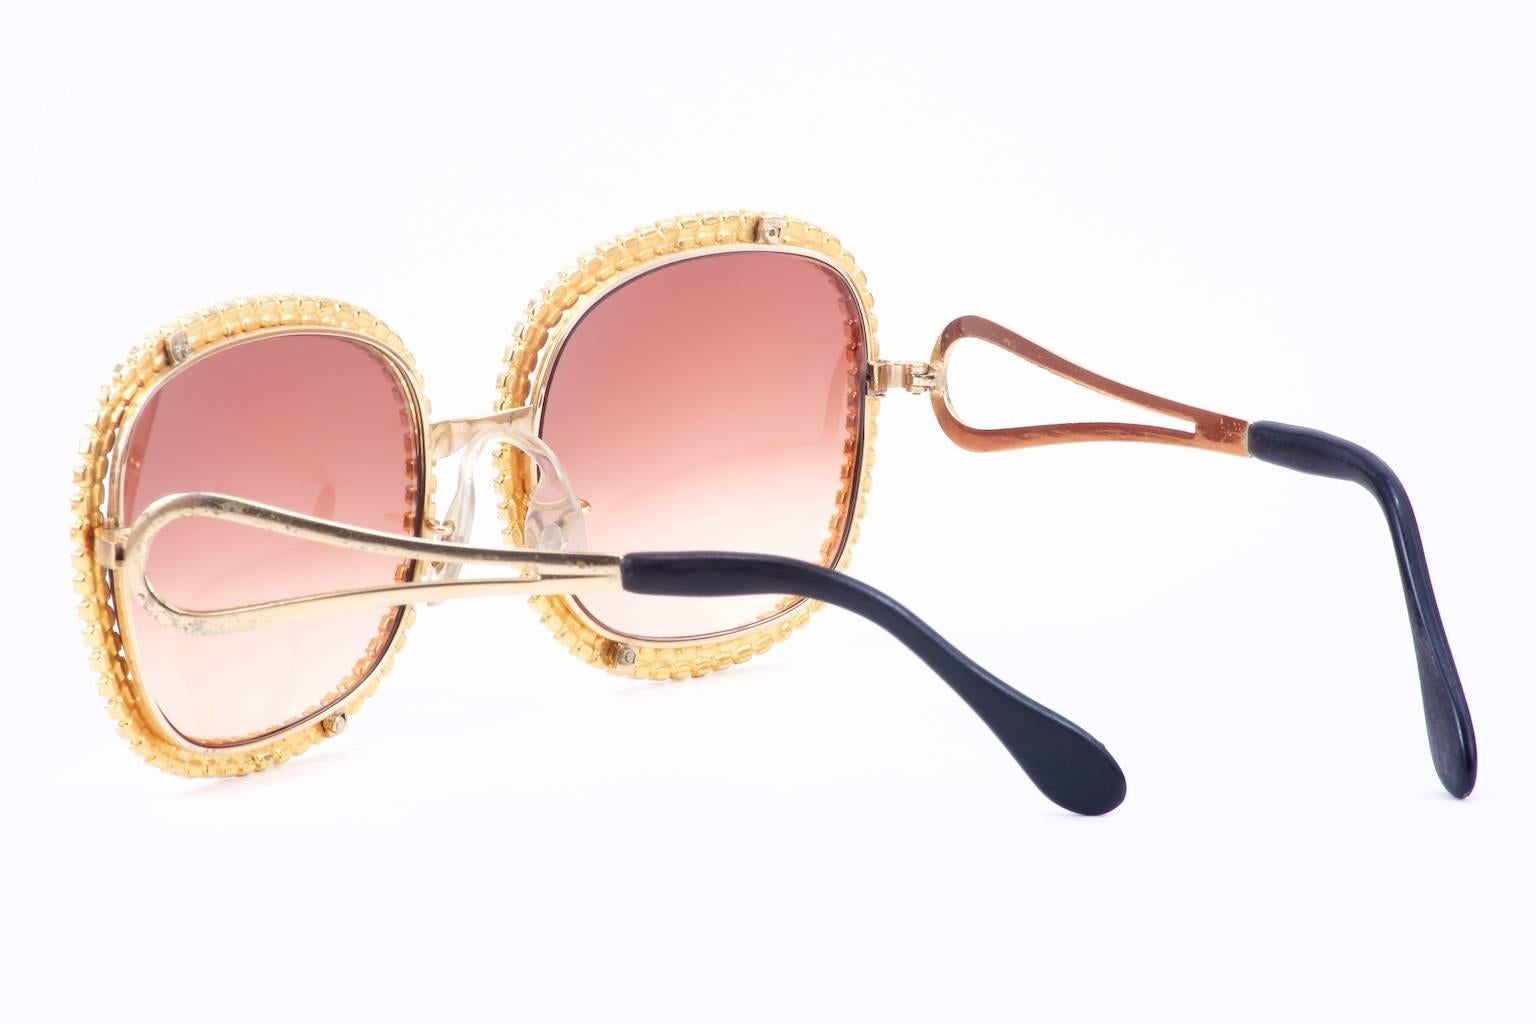 Revamped from the vault with a modern edge, the luxurious elegance for today’s sophisticated woman. Tura’s legacy is filled with jewelry-embellished styles using interesting and innovative techniques. This frame features rich crystals, gold and